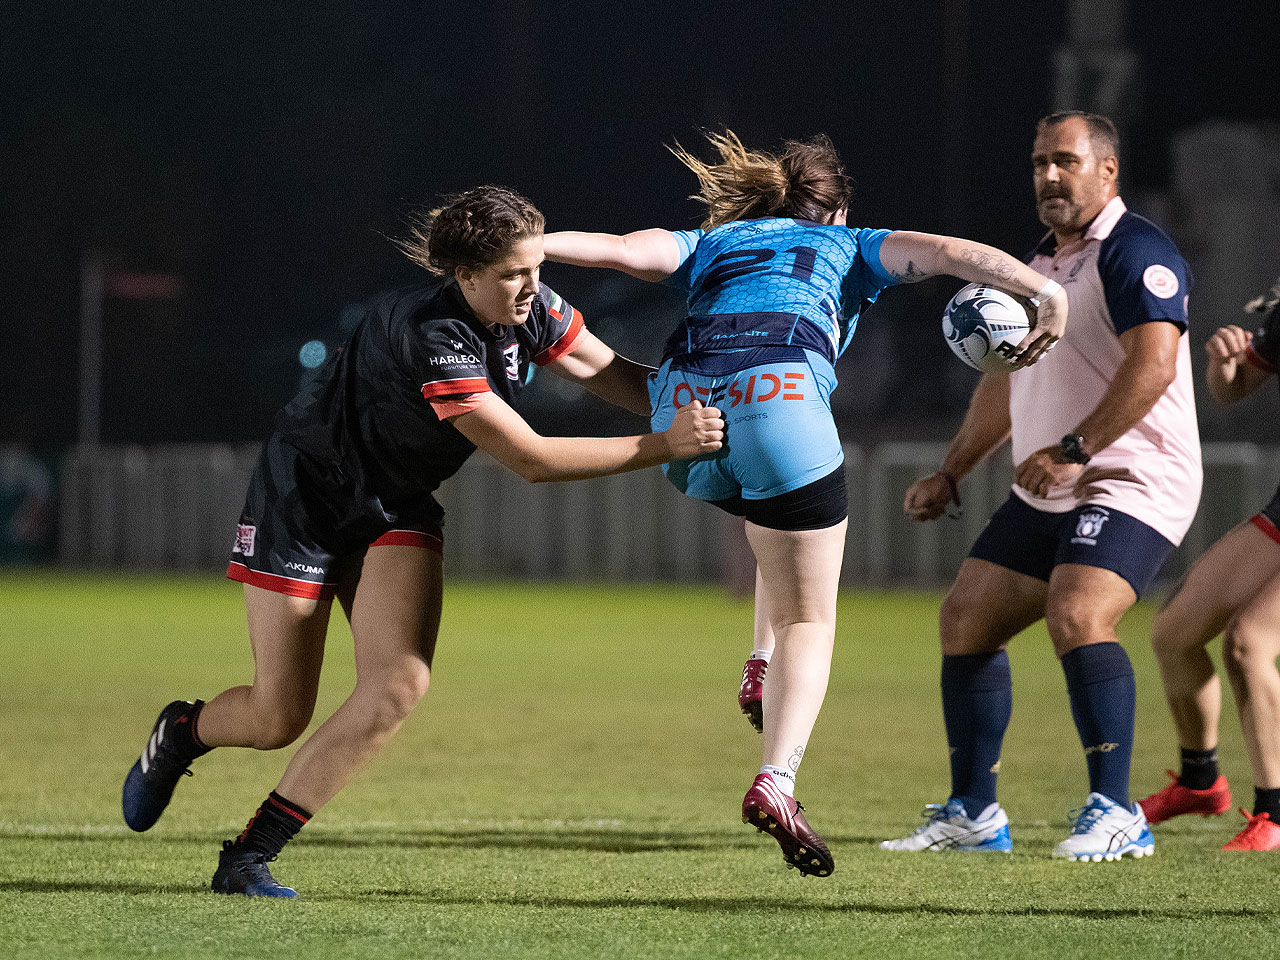 Exiles Ladies romp to win over Dubai Sharks in first senior competitive match